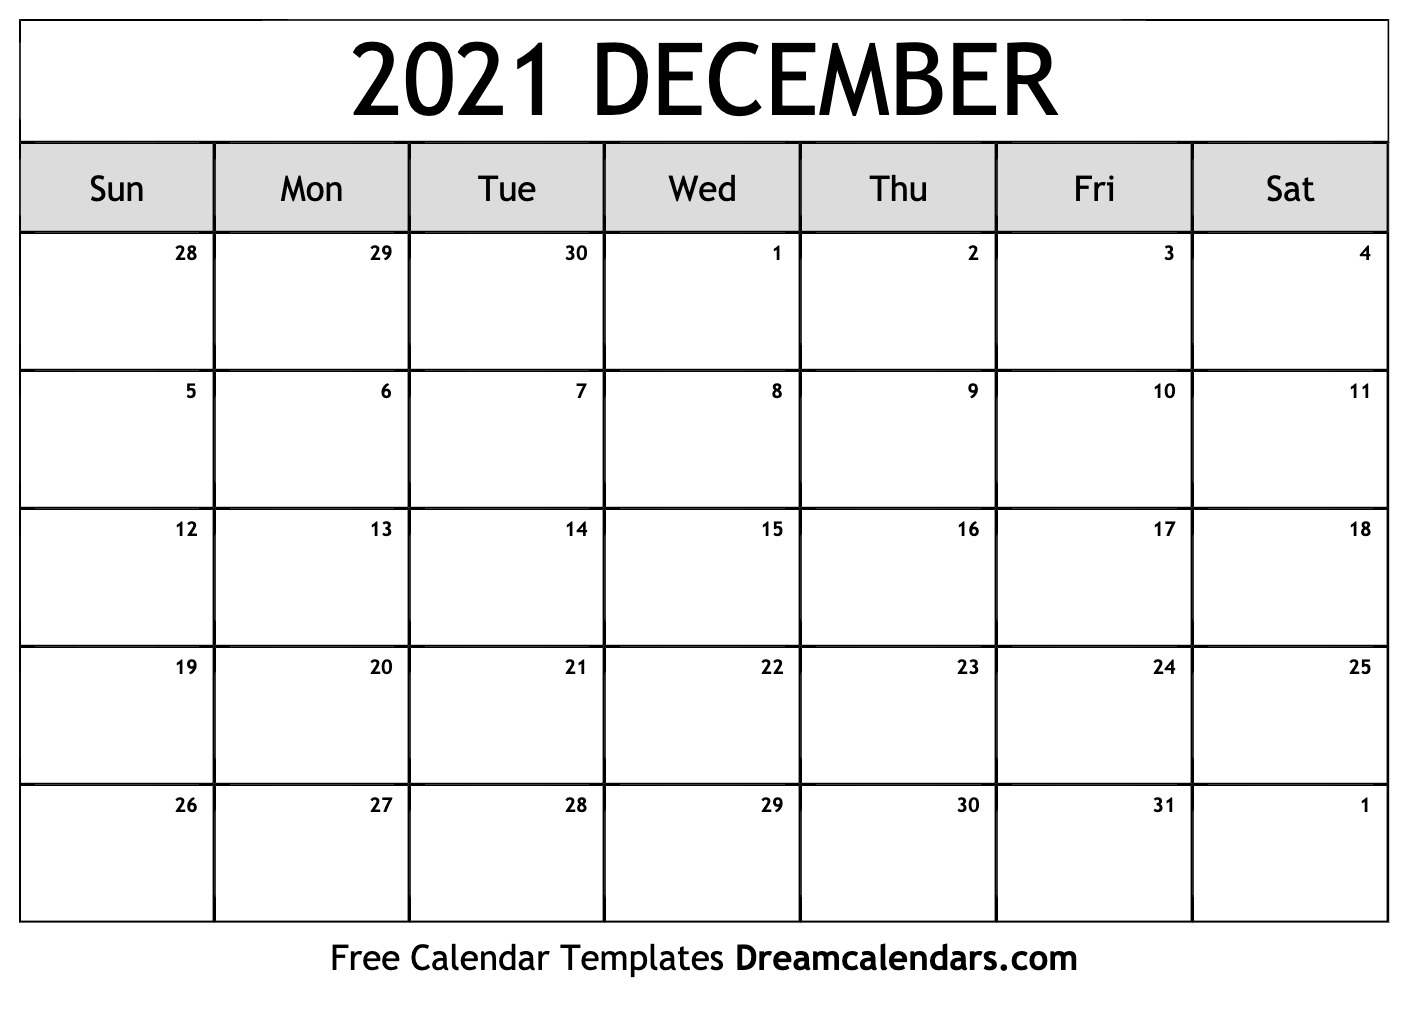 December 2021 Calendar - Free Printable with Holidays and Observances